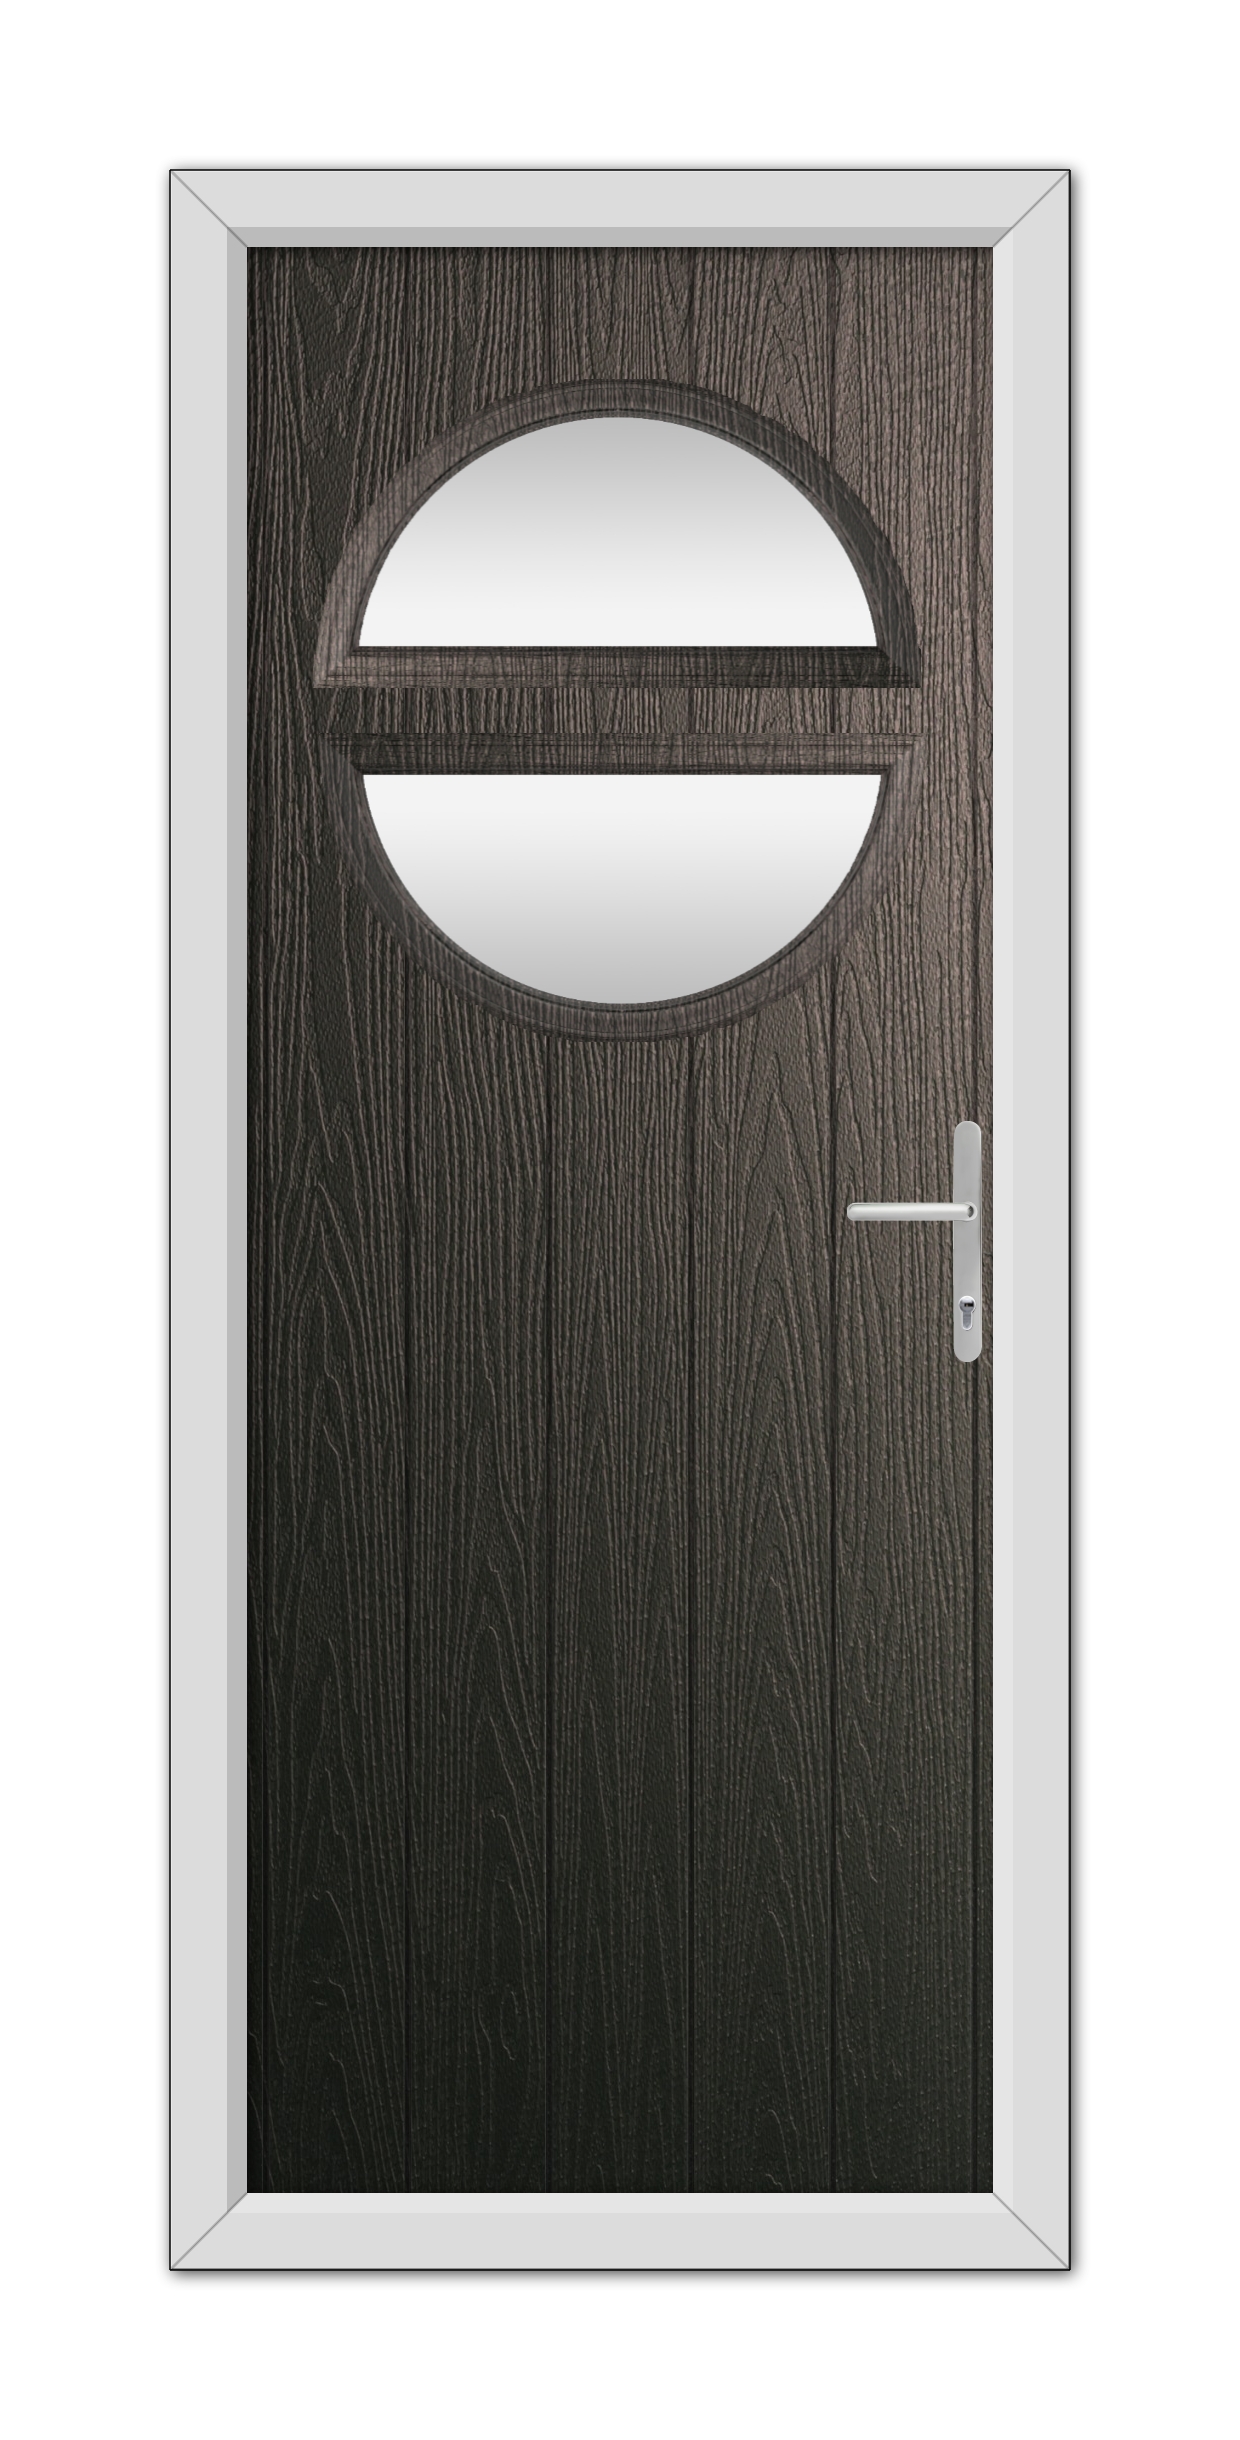 A Schwarzbraun Kent Composite Door 48mm Timber Core with a horizontal oval glass panel, encased in a white frame, isolated on a white background.